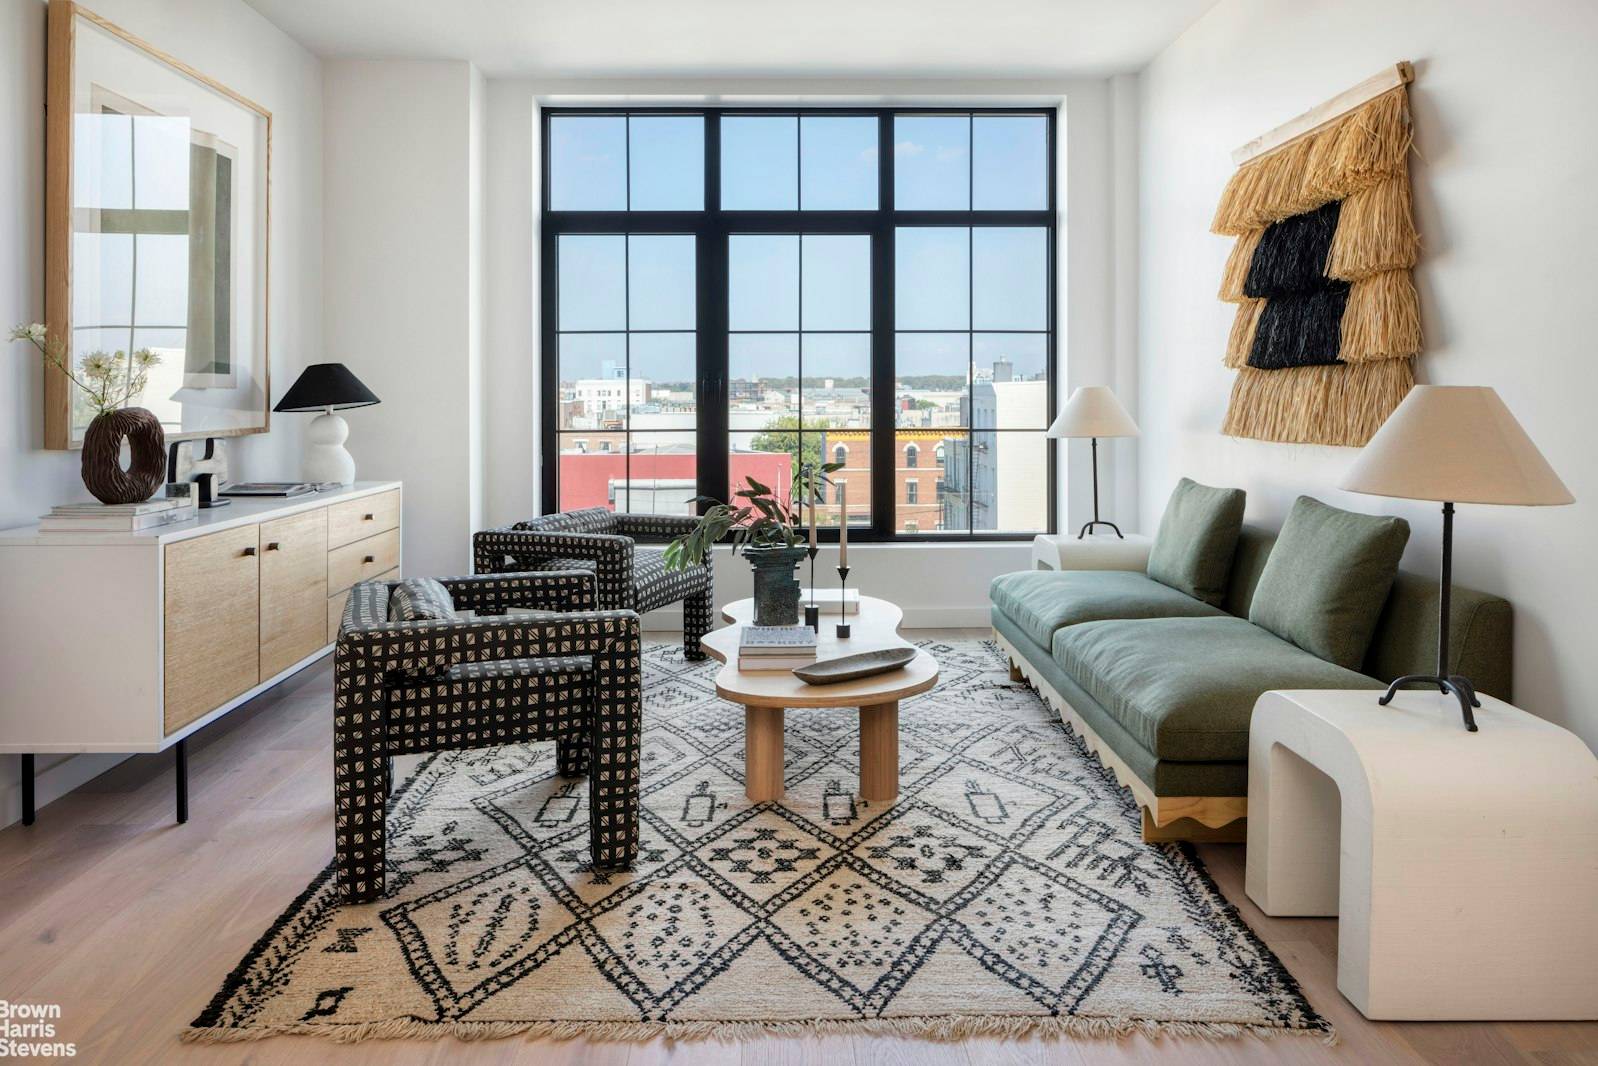 Welcome to The Lumin, a newly constructed boutique scale condominium featuring a traditional red brick facade with oversized warehouse style windows.